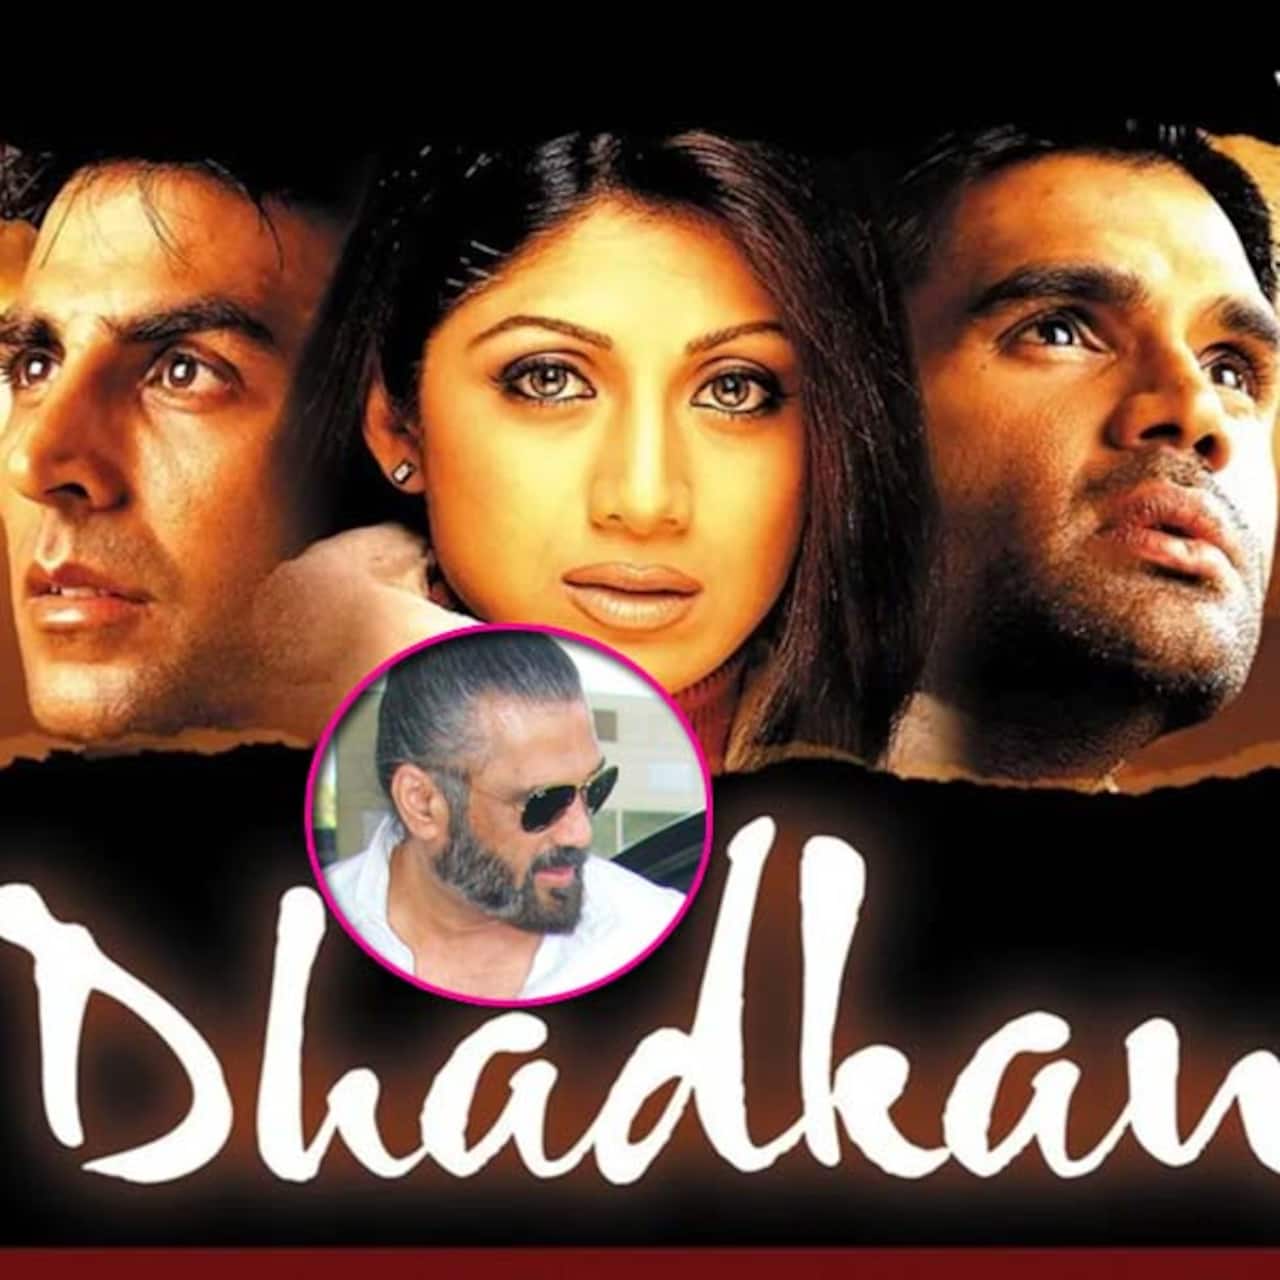 Dhadkan sequel to feature Akshay Kumar and Suneil Shetty's sons, Aarav and Ahan? — here's what we know